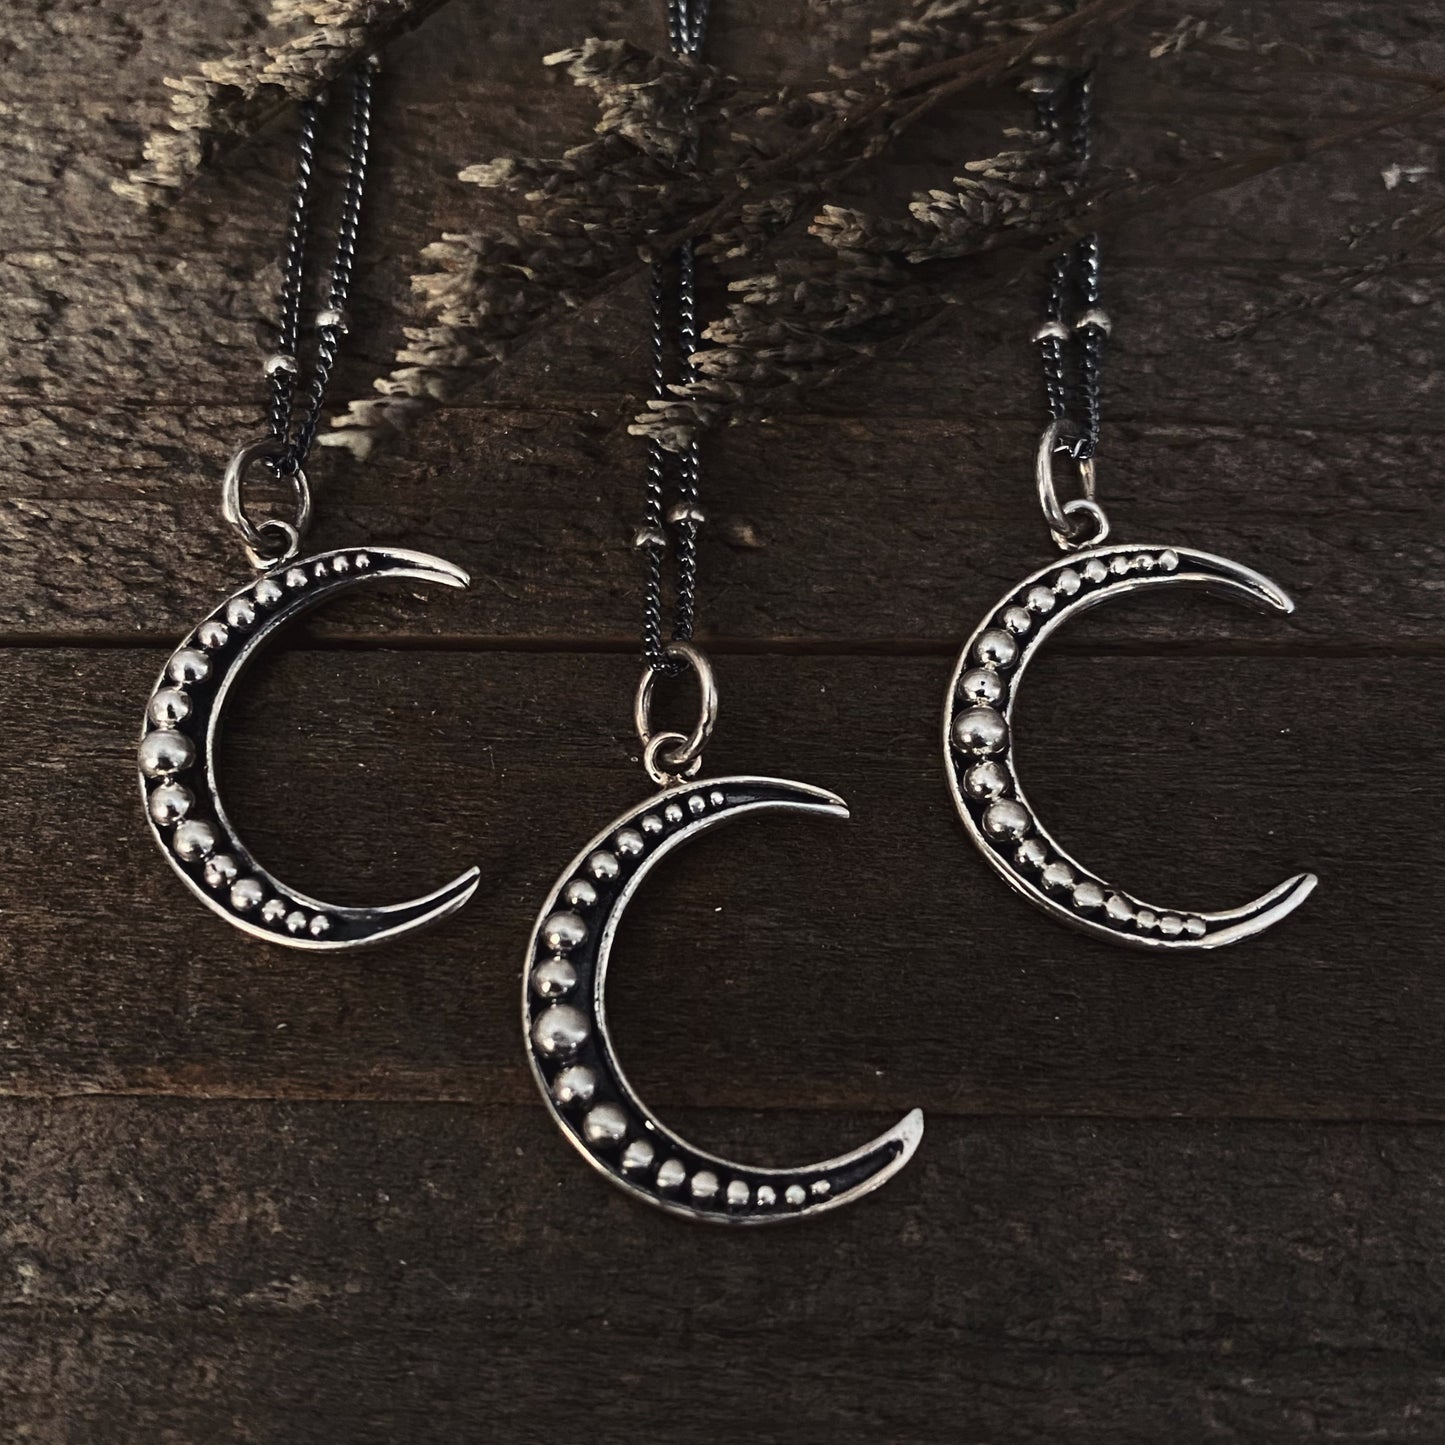 Lunar Guidance Pendant ✦ Light in the Darkness Mini Collection